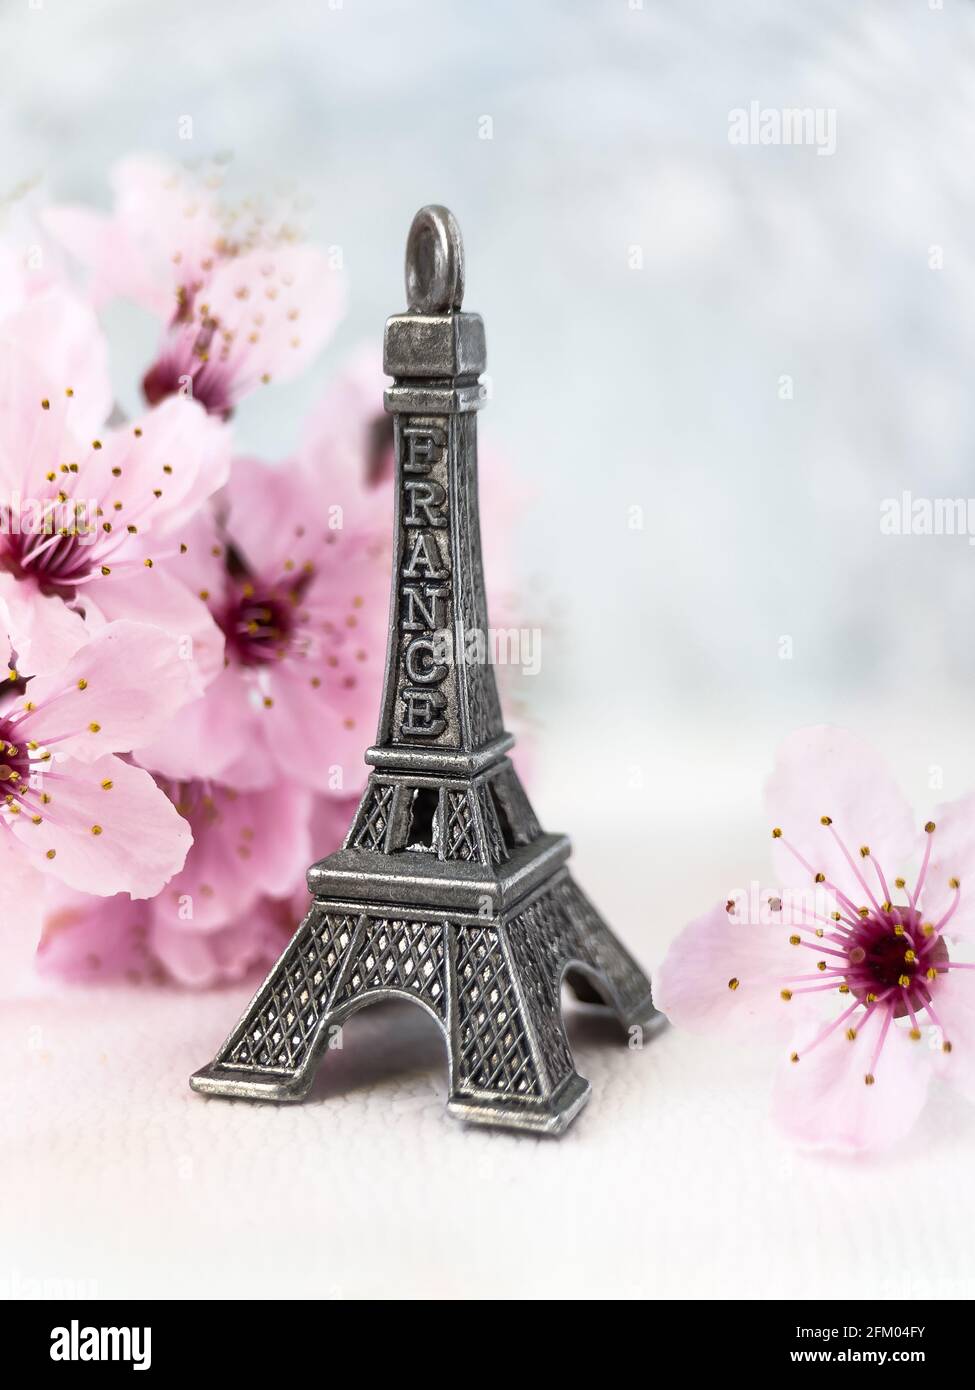 Miniature of Eiffel Tower with blooming cherry blossom. Eiffel Tower toy with spring cherry flowers. Stock Photo